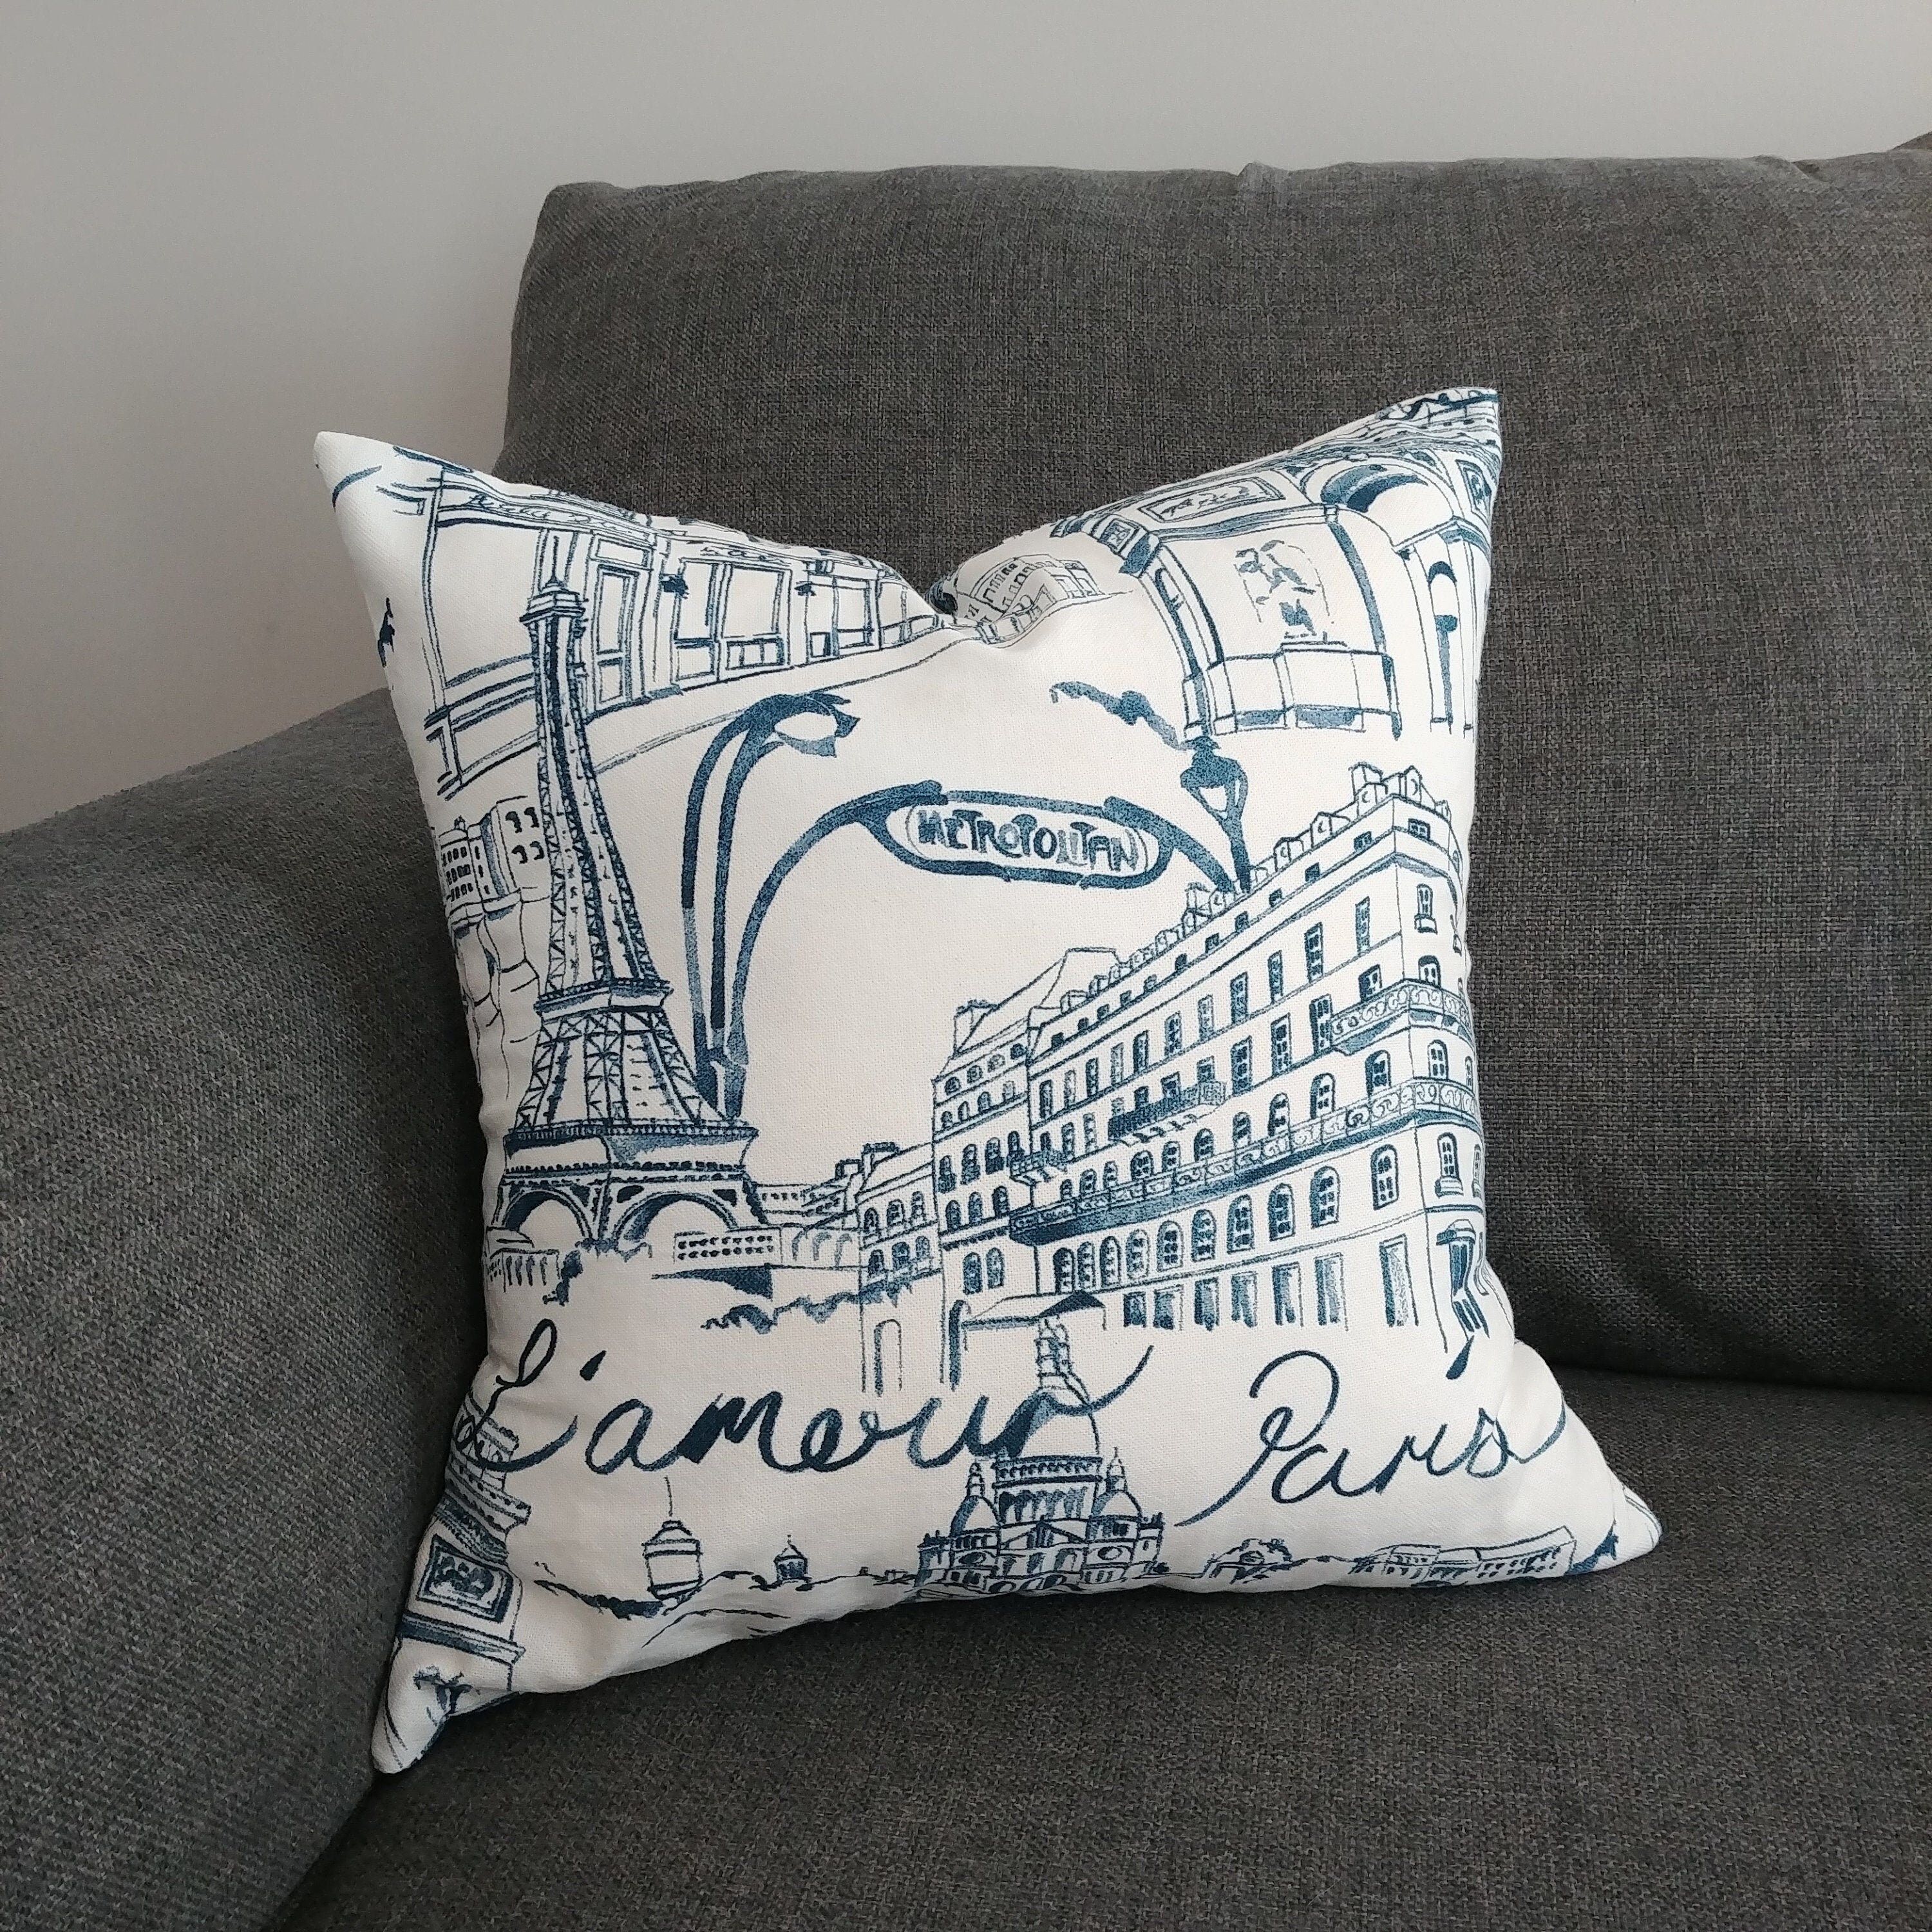 Paris Blue Shopping Spree Fashion Bonjour Throw Pillow – Ink and Rags